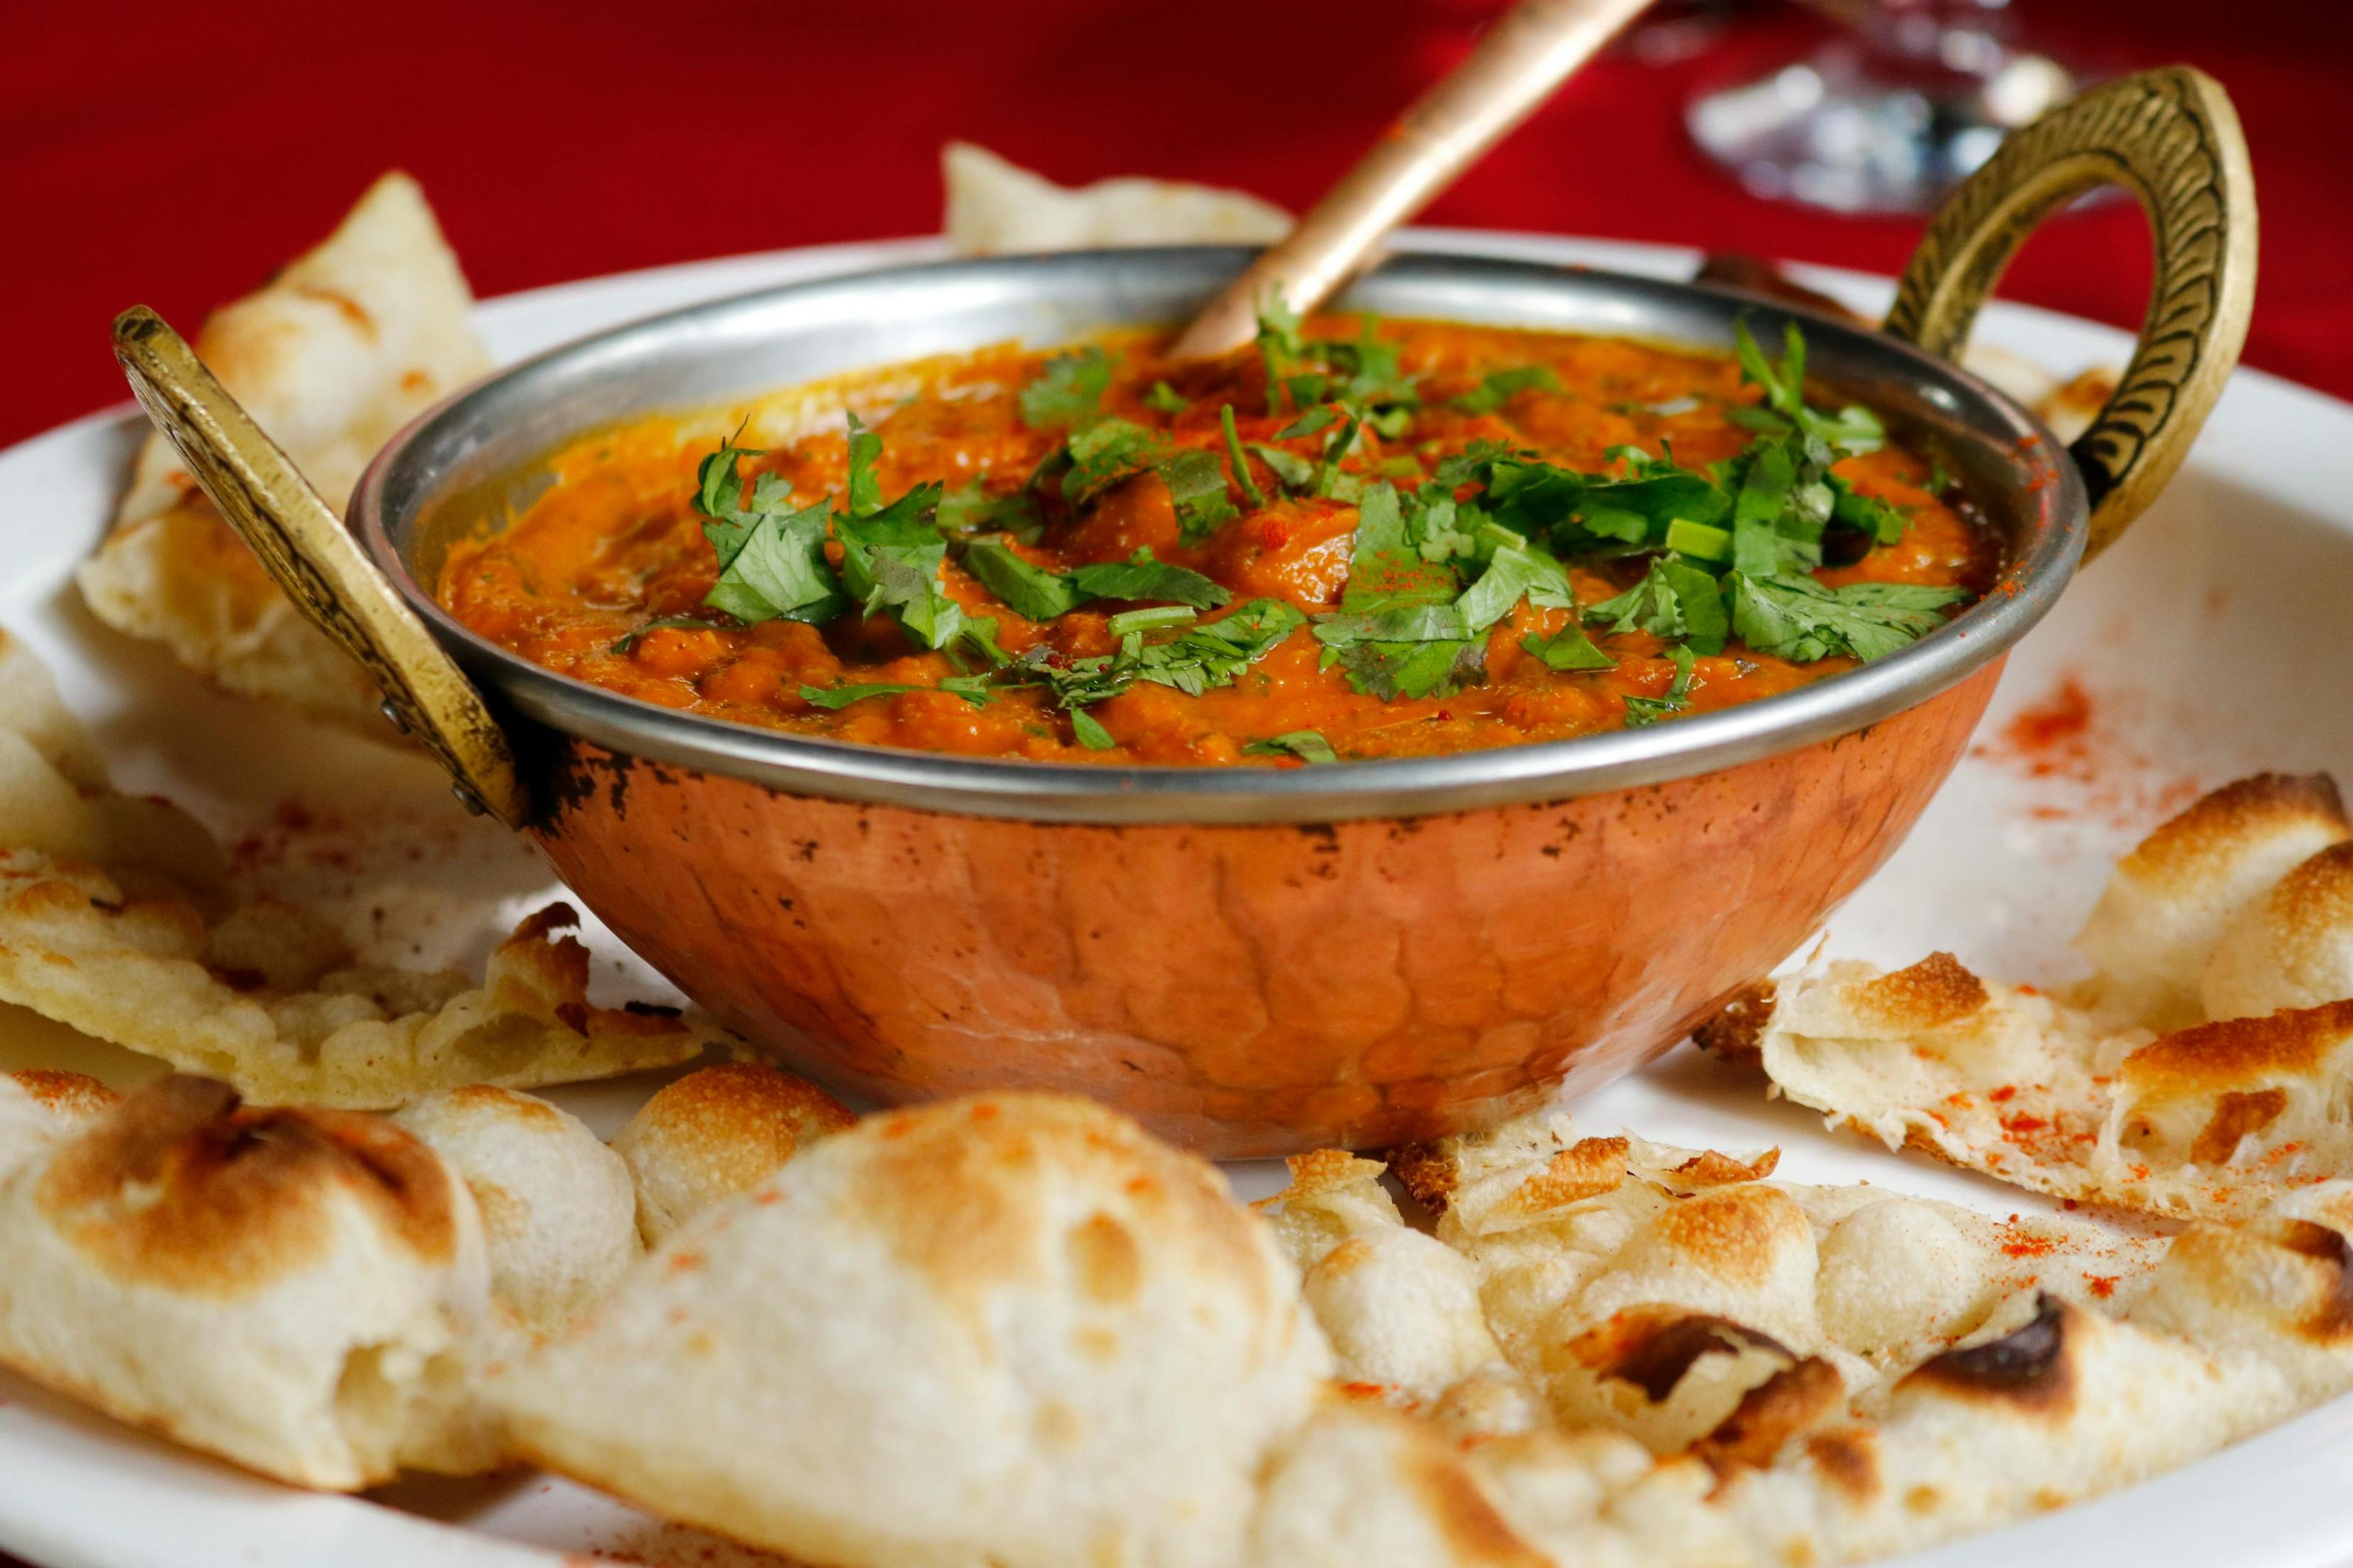 Monthly Competition: Win a Meal for 2 at Bombay Nite!